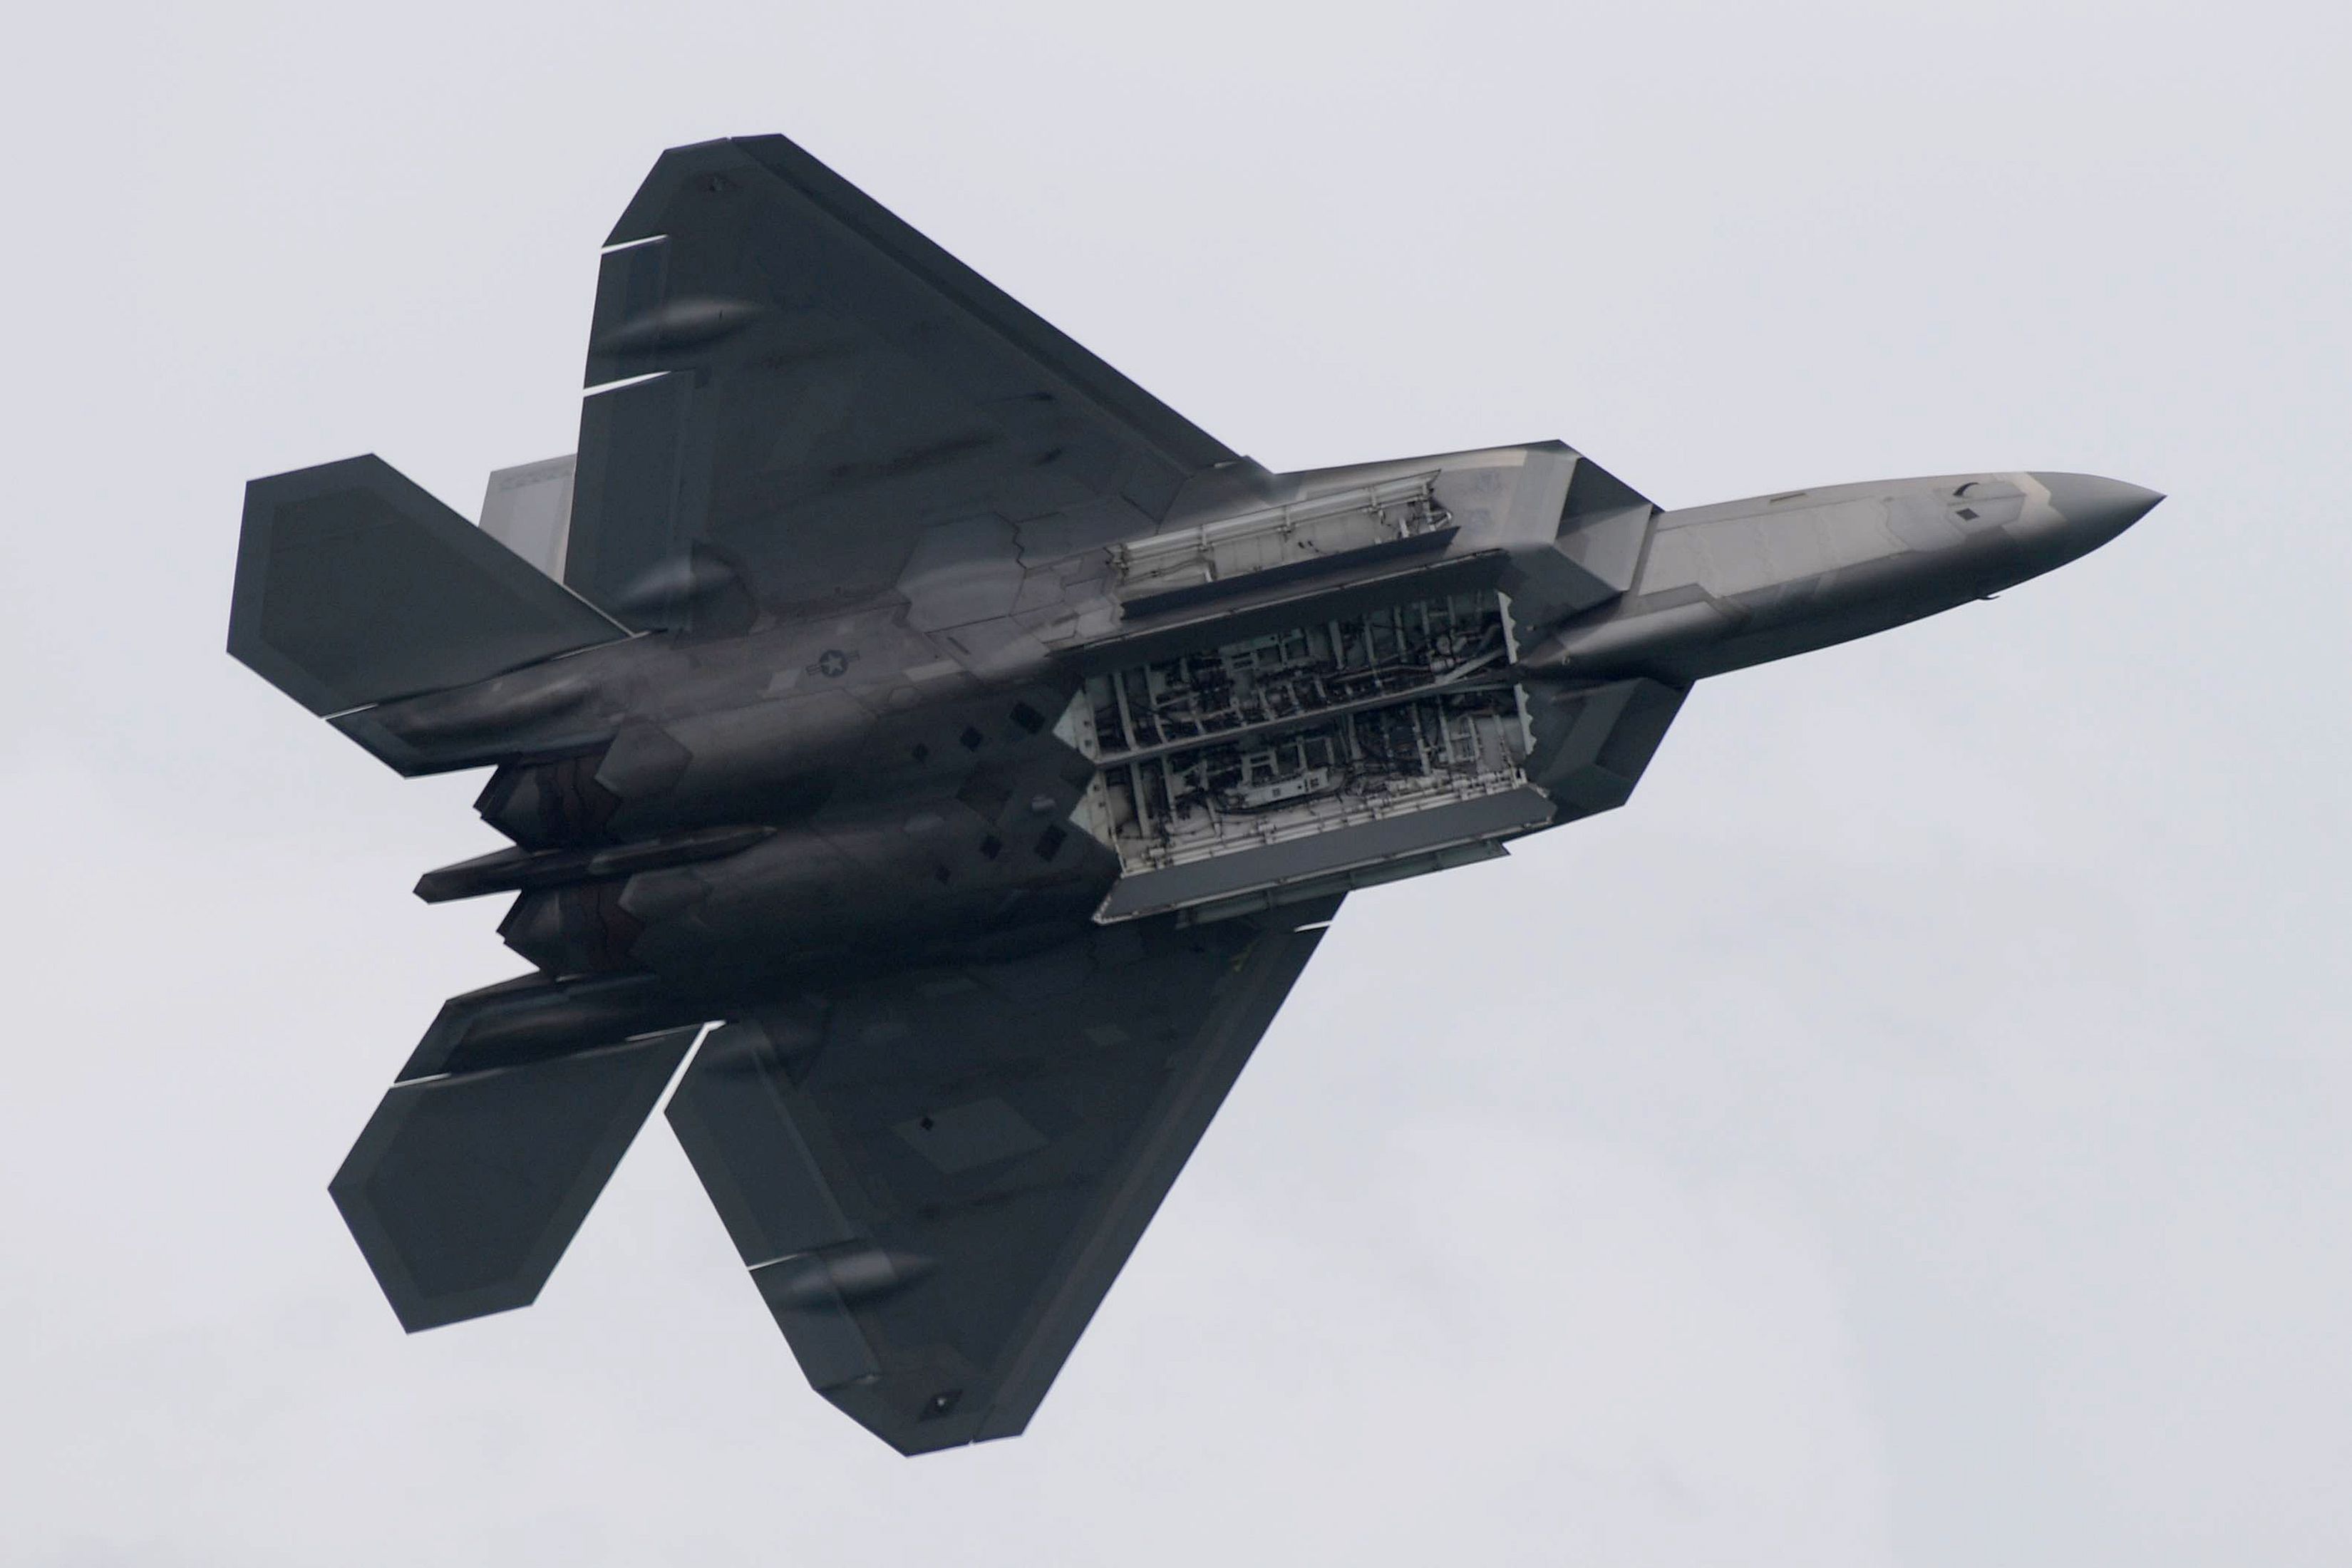 Trump Approves Selling F-22 Raptor Fighter Jets To Israel: Report - I24NEWS